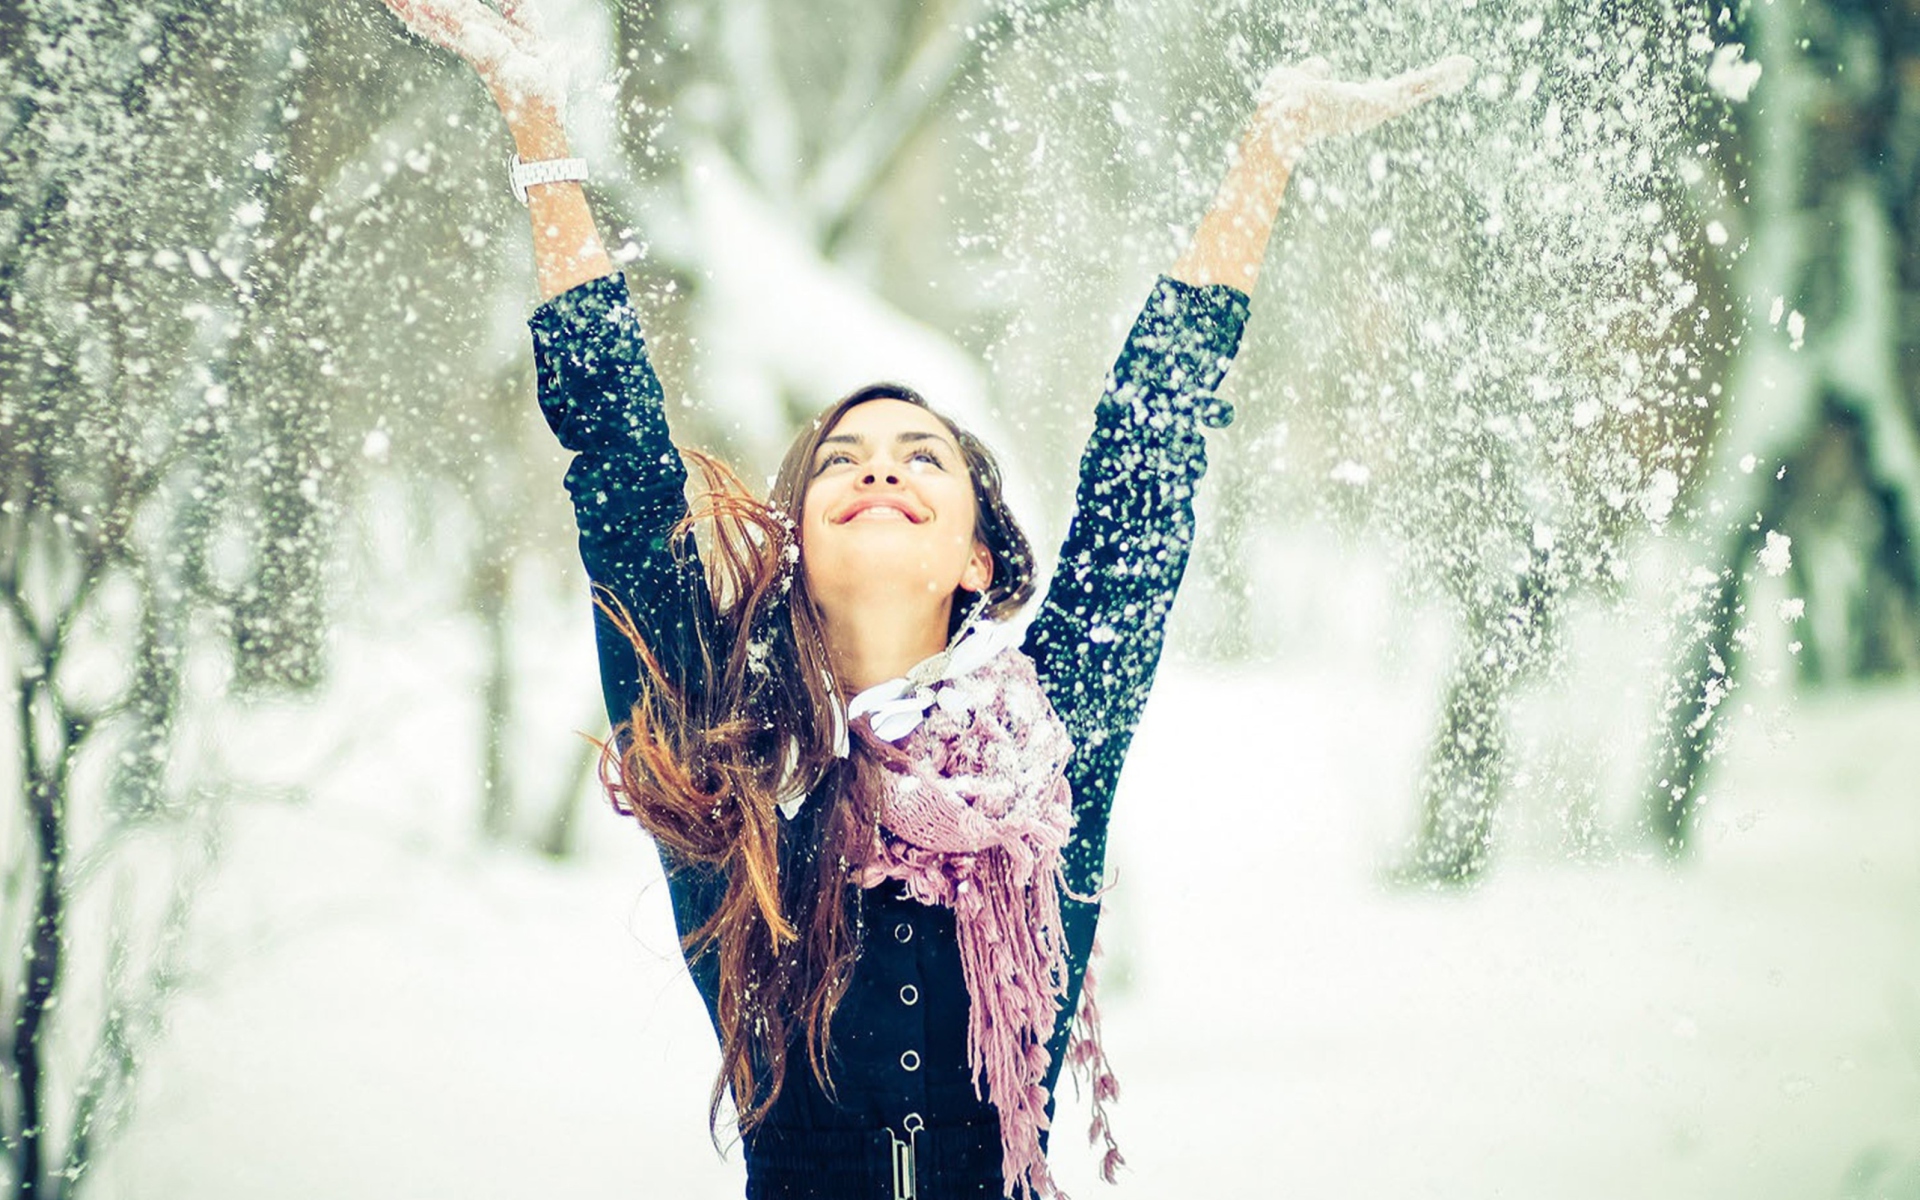 Winter, Snow And Happy Girl wallpaper 1920x1200